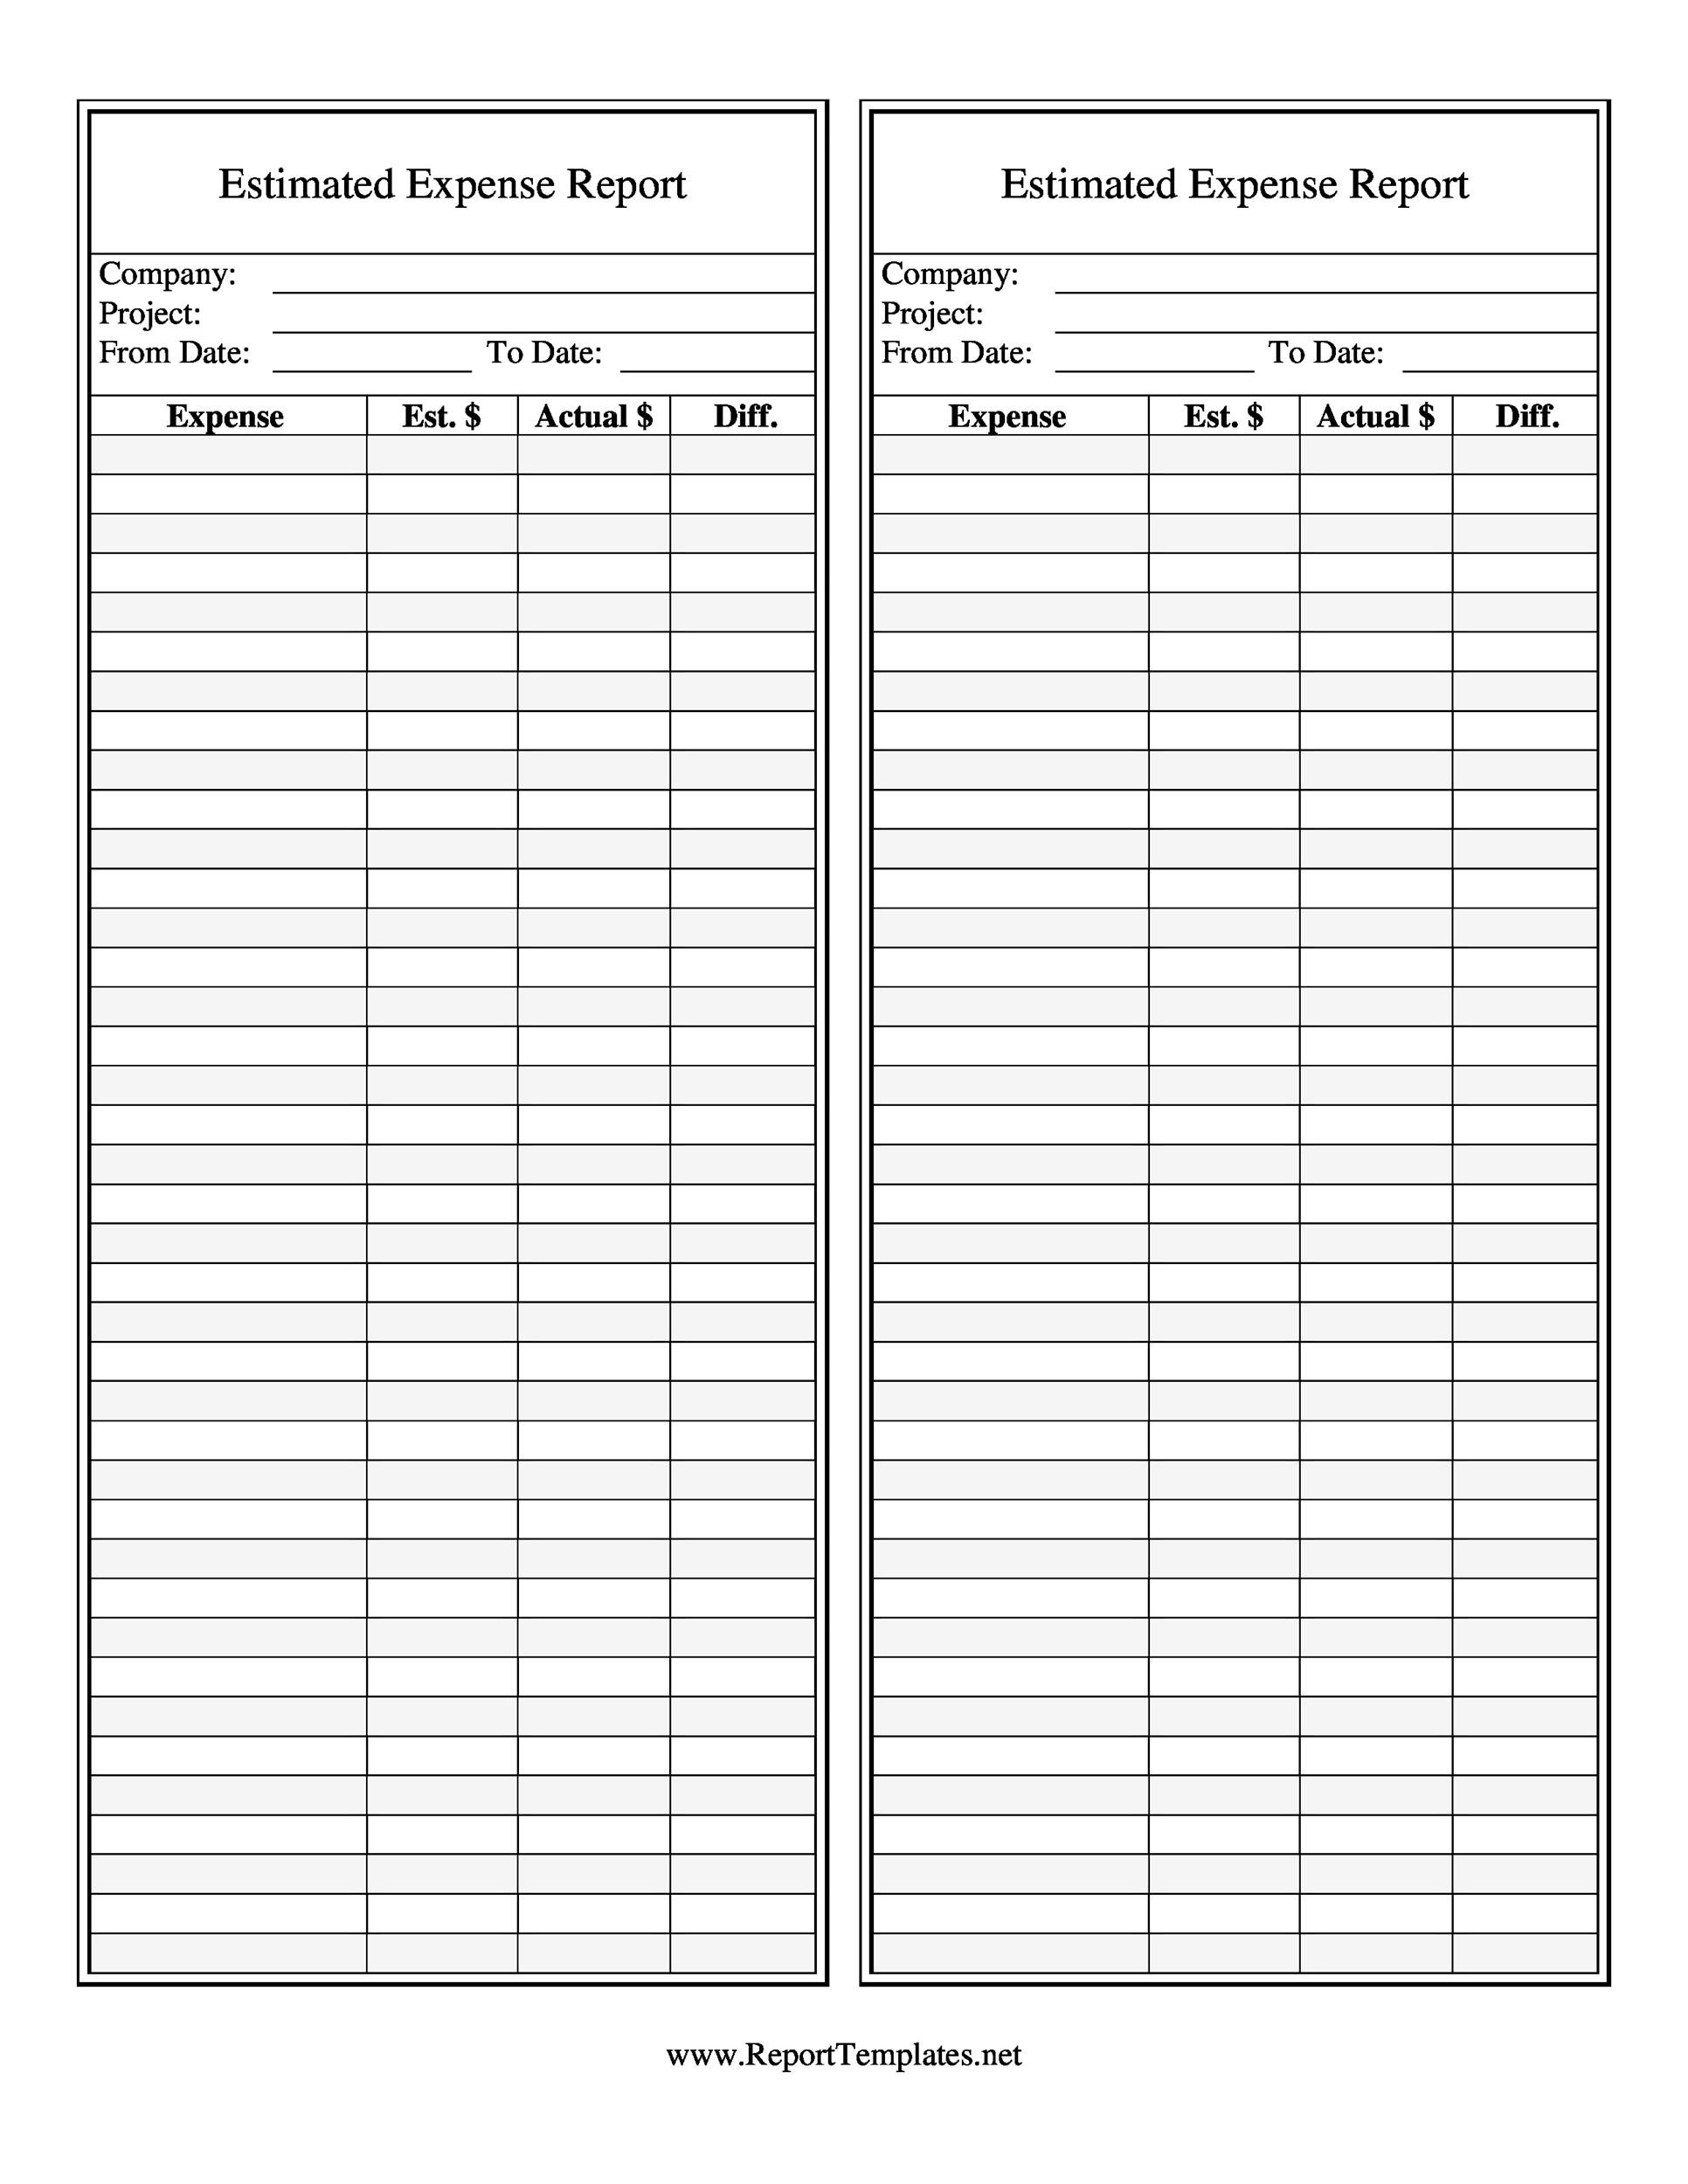 40-expense-report-templates-to-help-you-save-money-template-lab